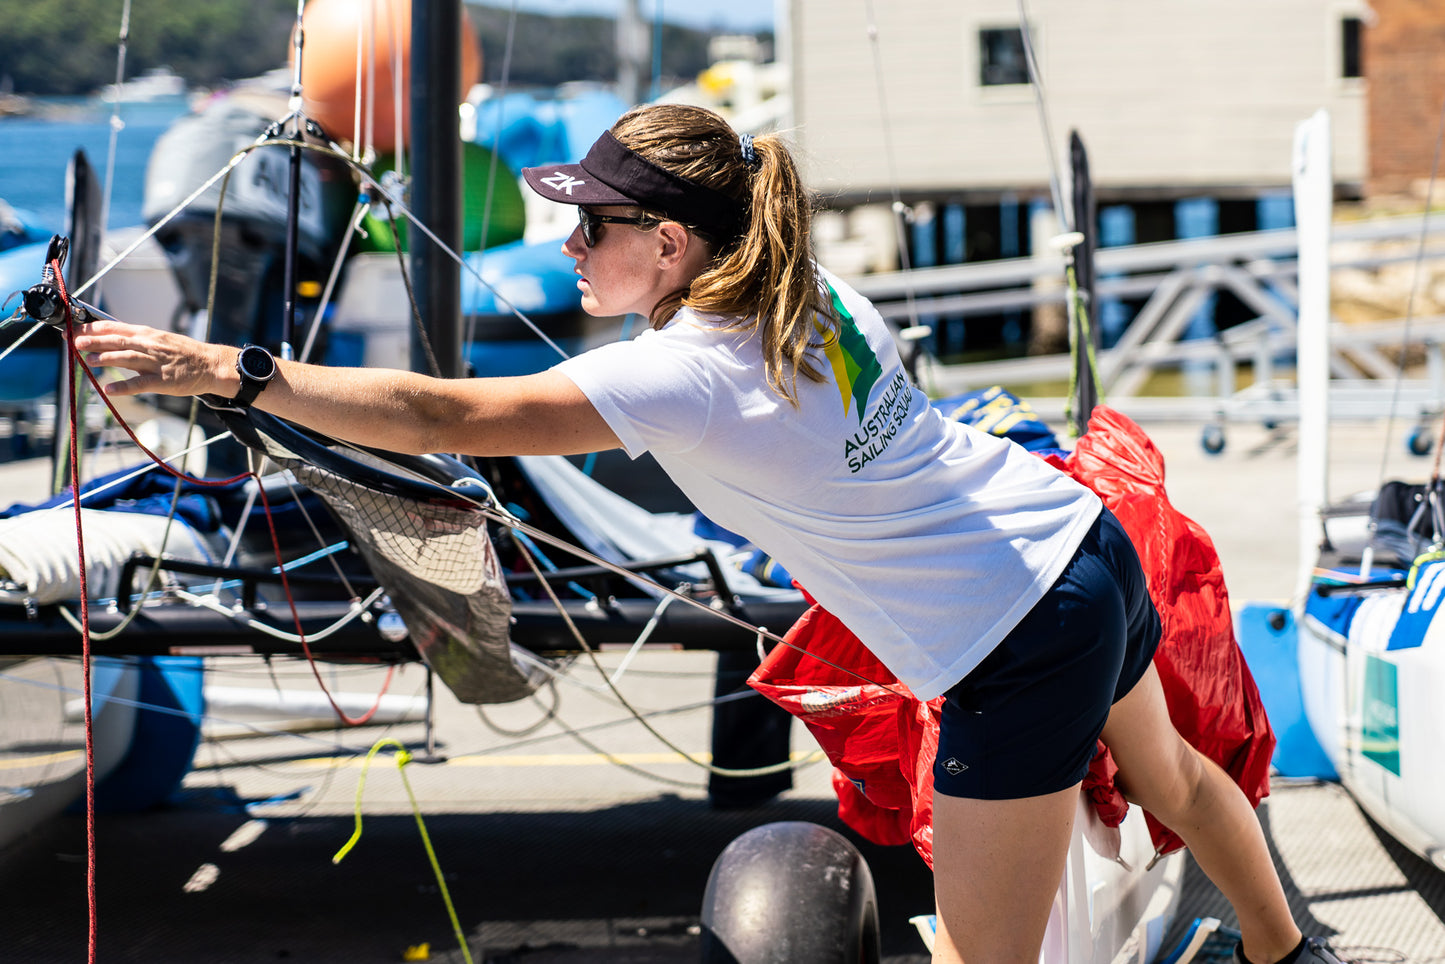 Nutricare and Australian Sailing Partner to Ensure Sailing’s Sustainability